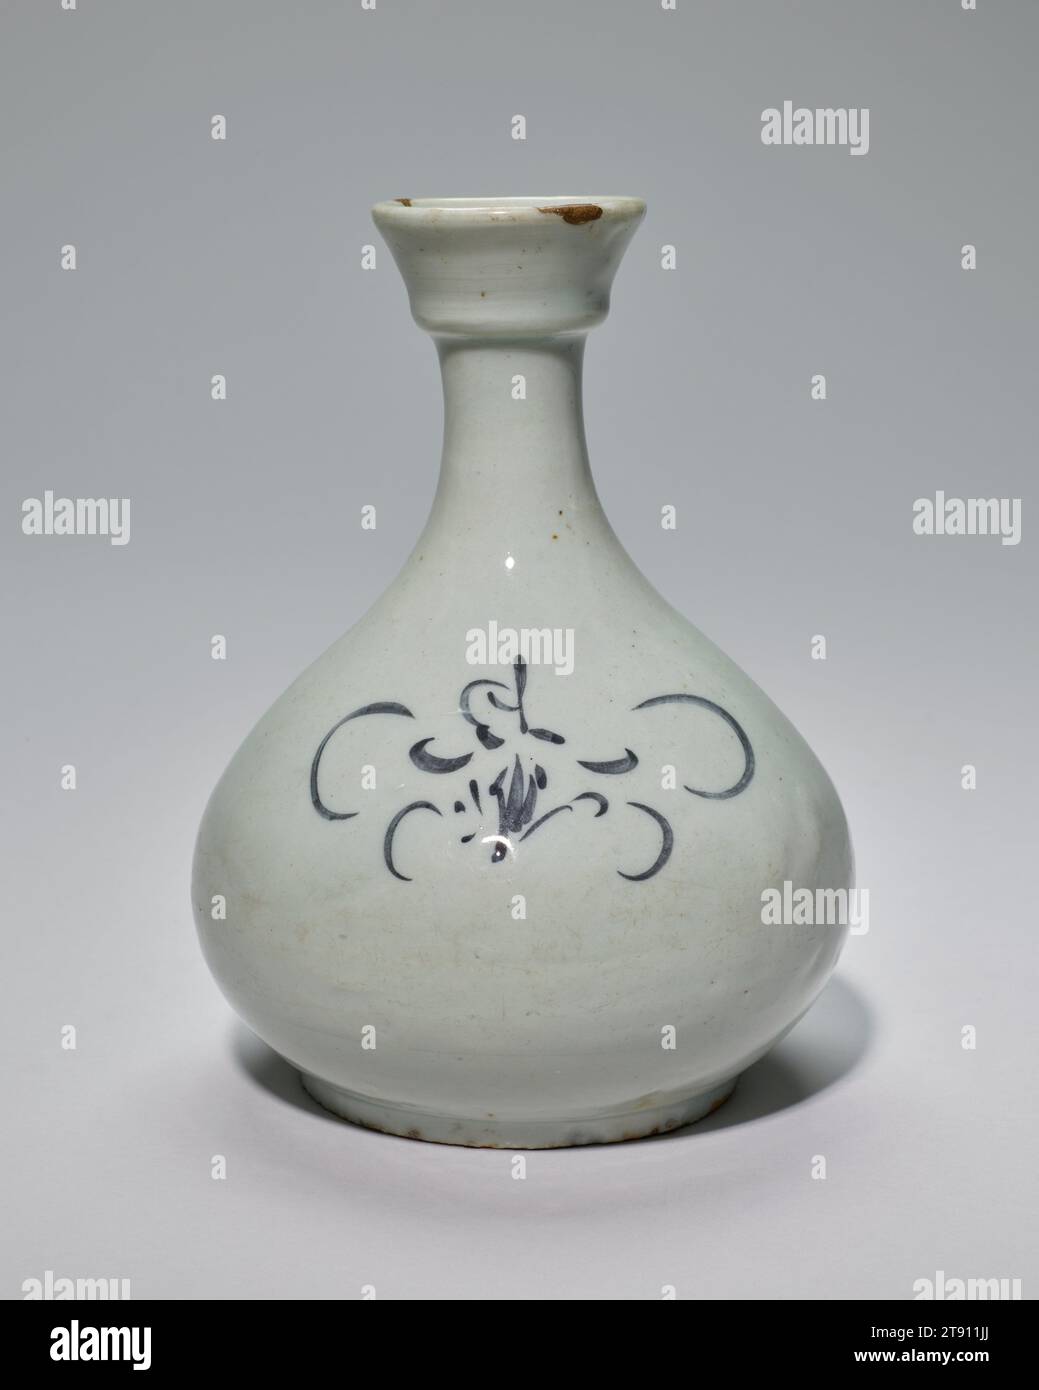 Vase, 18th century, Unknown Korean, 8 1/2 in. (21.59 cm), Porcelain with underglaze blue decor, Korea, 18th century, China's cultural influence on Korea dates to over two thousand years ago when they first engaged in trade. This influence is seen in Korea's ceramic production, when local potters began making porcelain at the end of the fourteenth century, with many of their wares modeled on Chinese prototypes. This later vase is no exception, as it features a cup-like mouth, which is also seen in Chinese porcelain. The abstract design in blue underglaze is suggestive of flowers Stock Photo